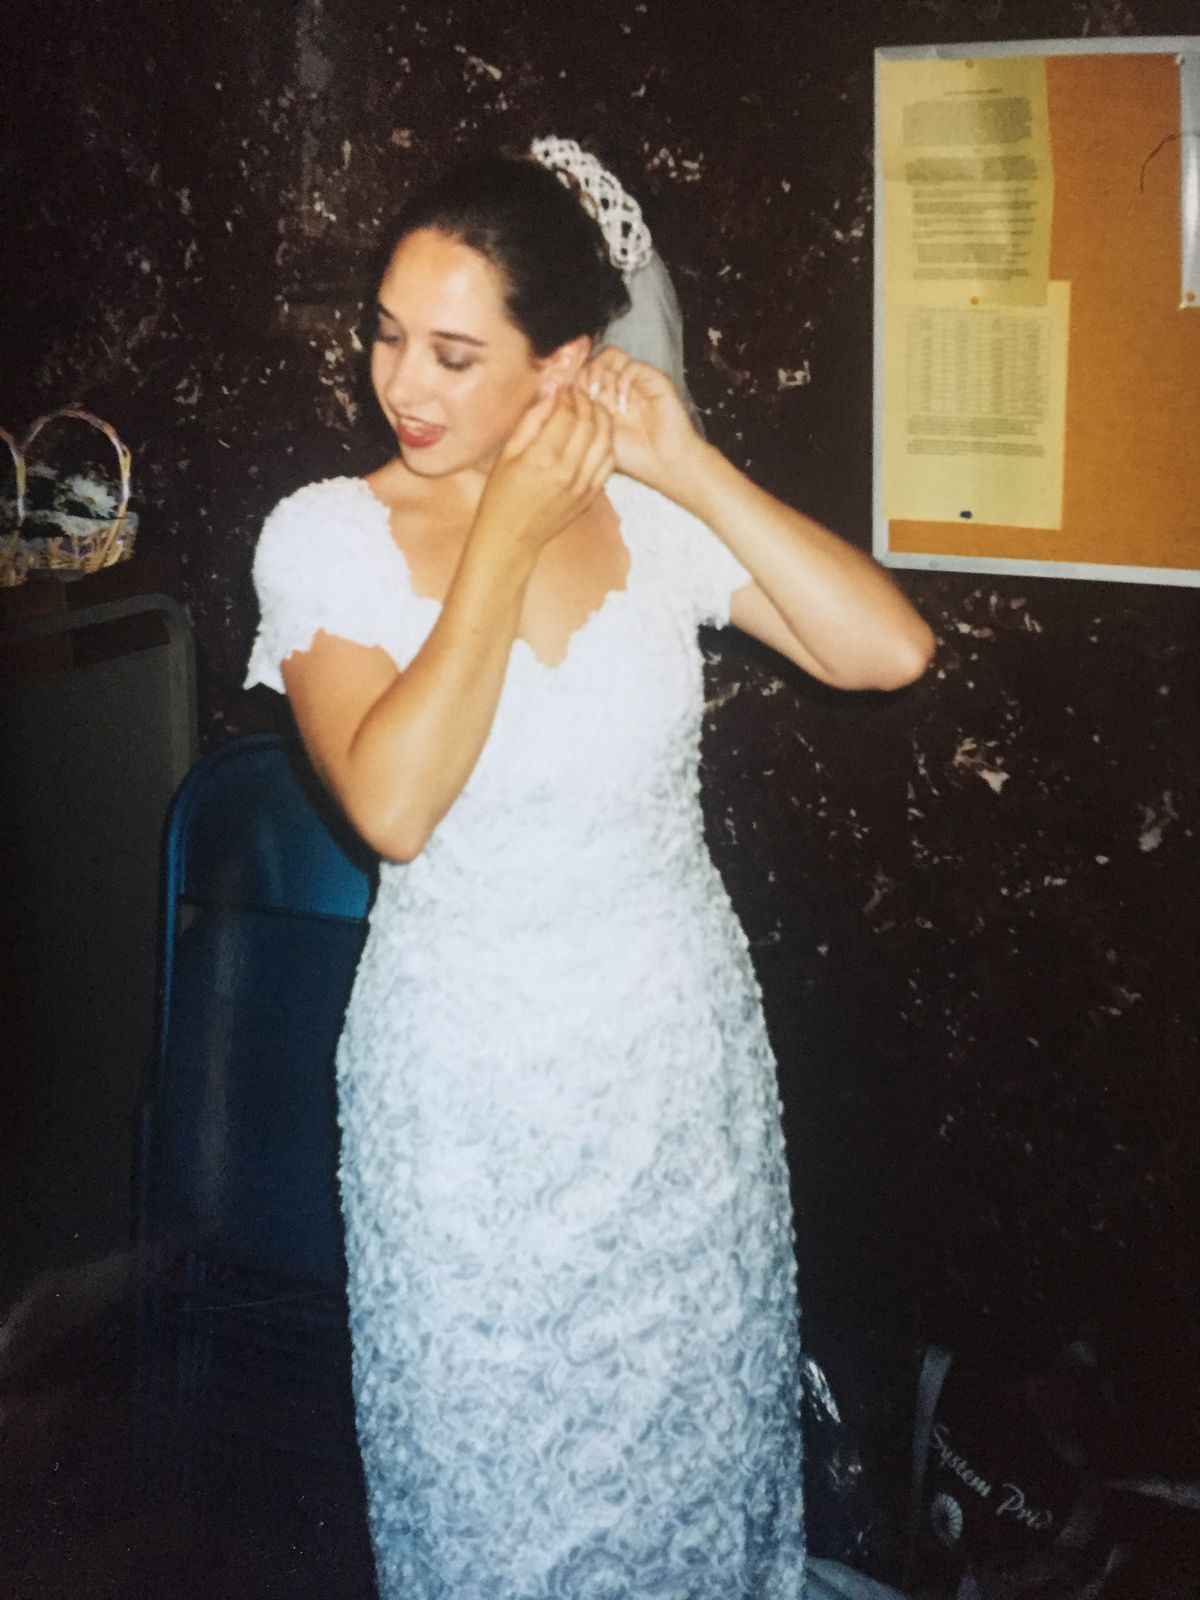 A Letter To A Much Younger Me On The Night Before Her Wedding